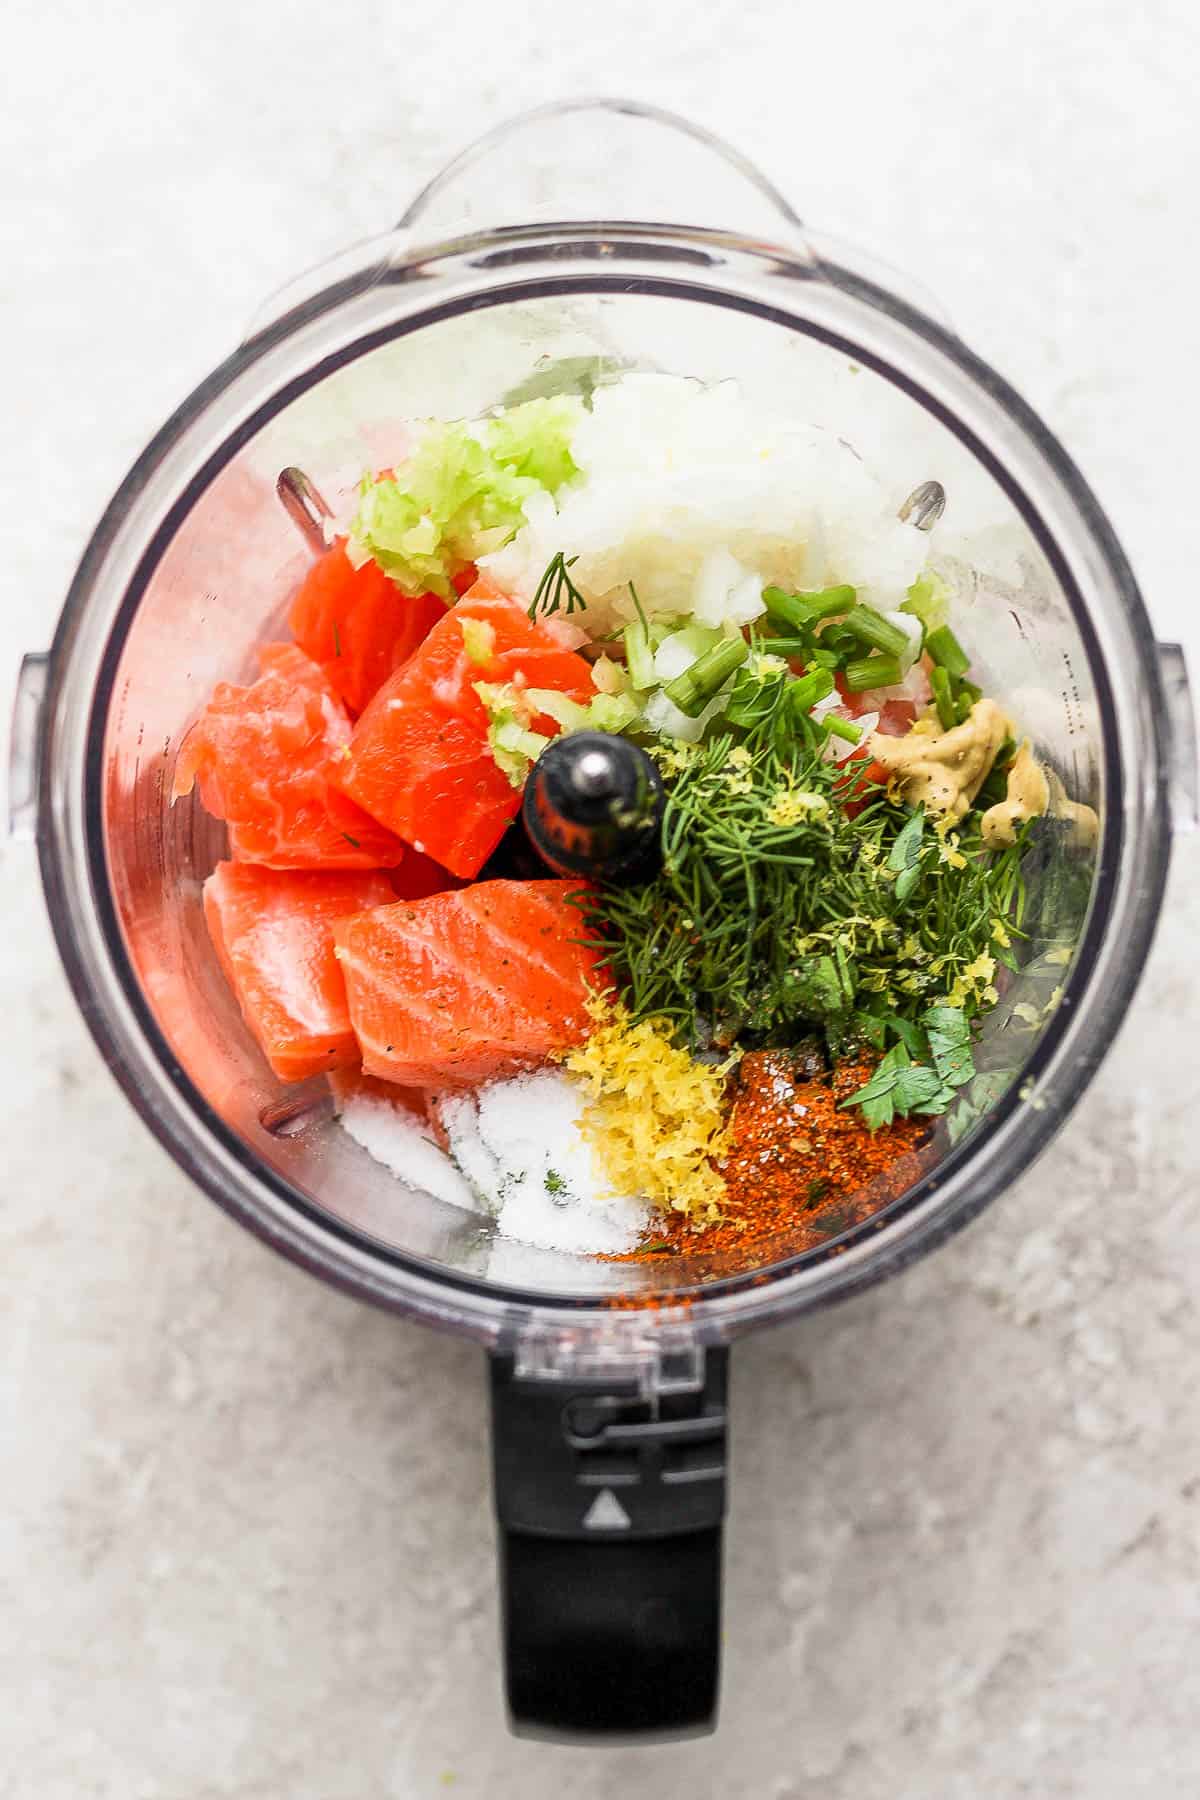 All of the burger ingredients in a food processor.